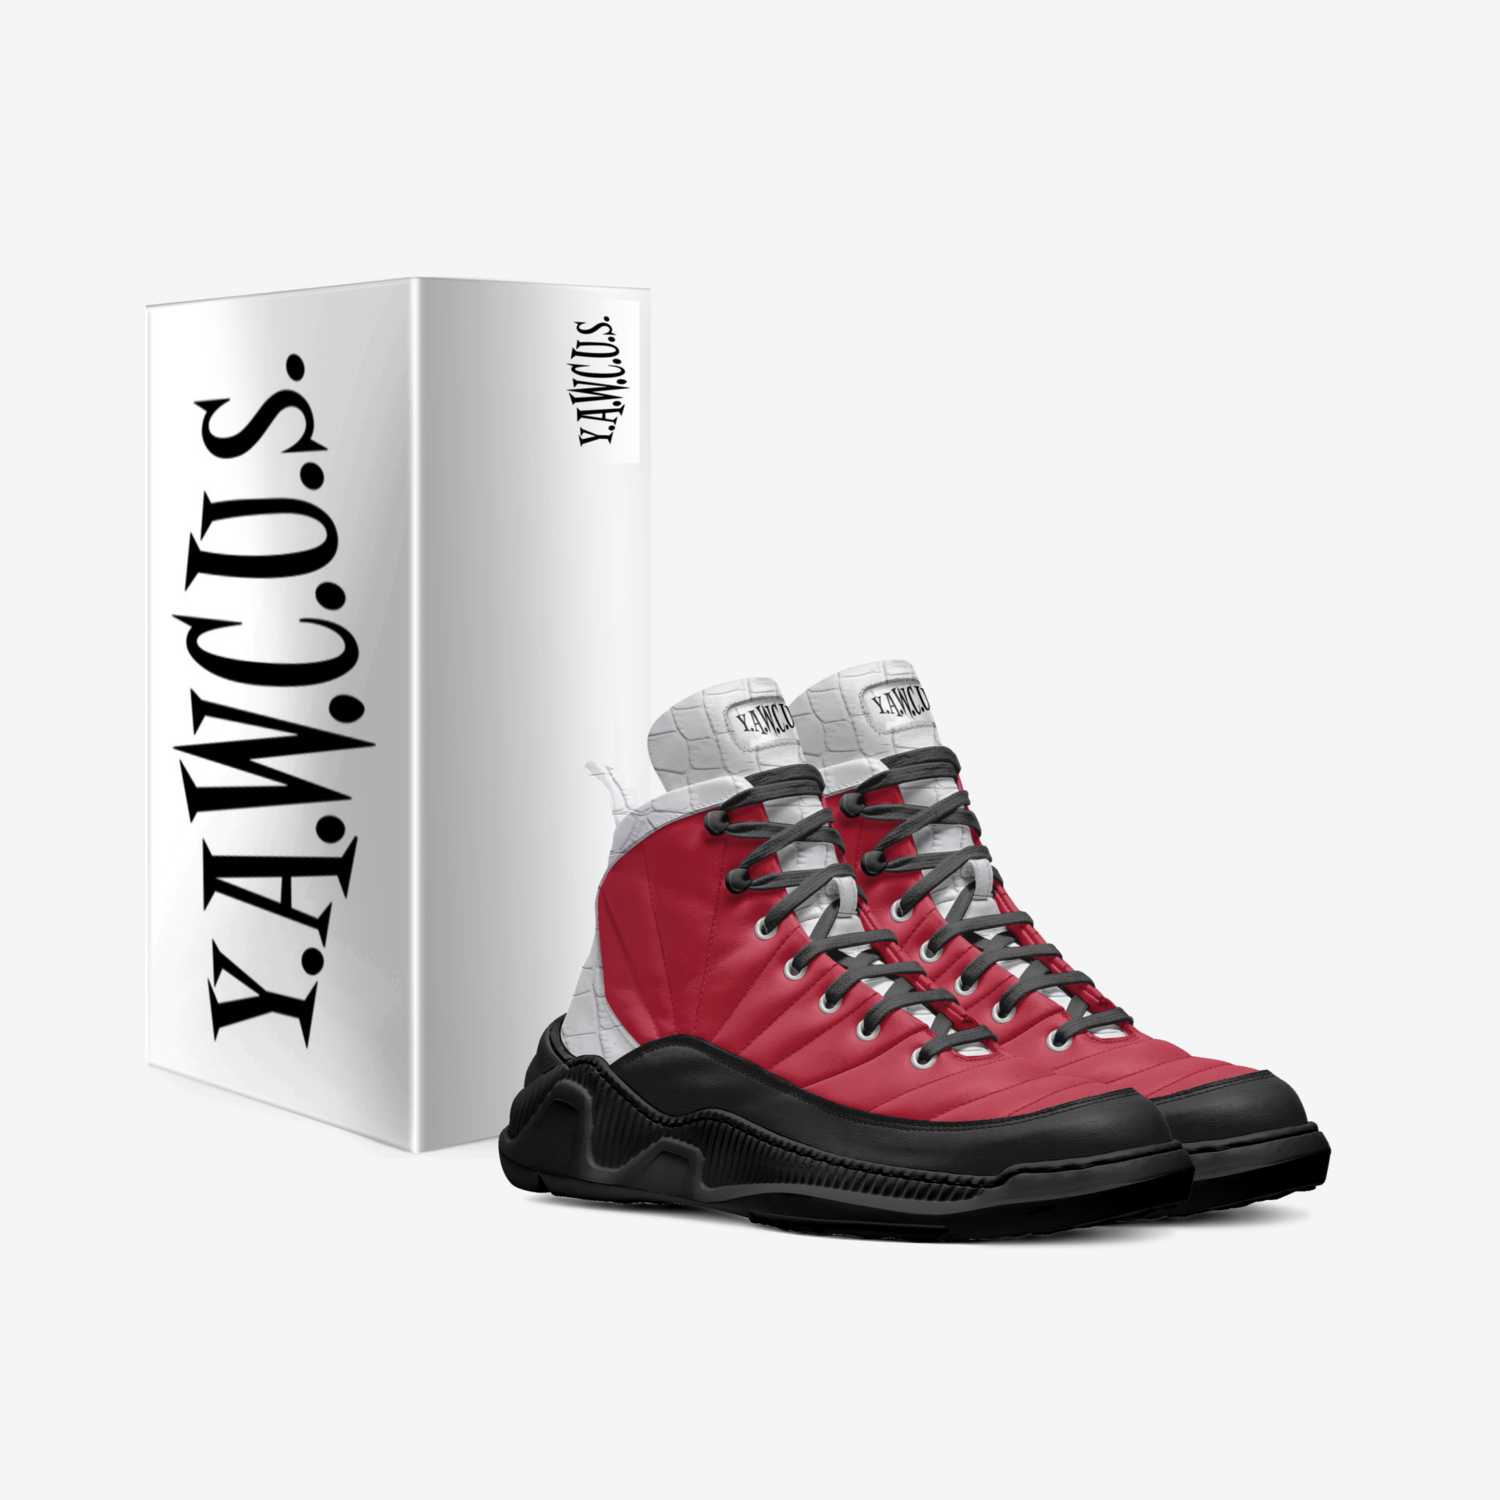 Aquarius-Red custom made in Italy shoes by Von Je | Box view